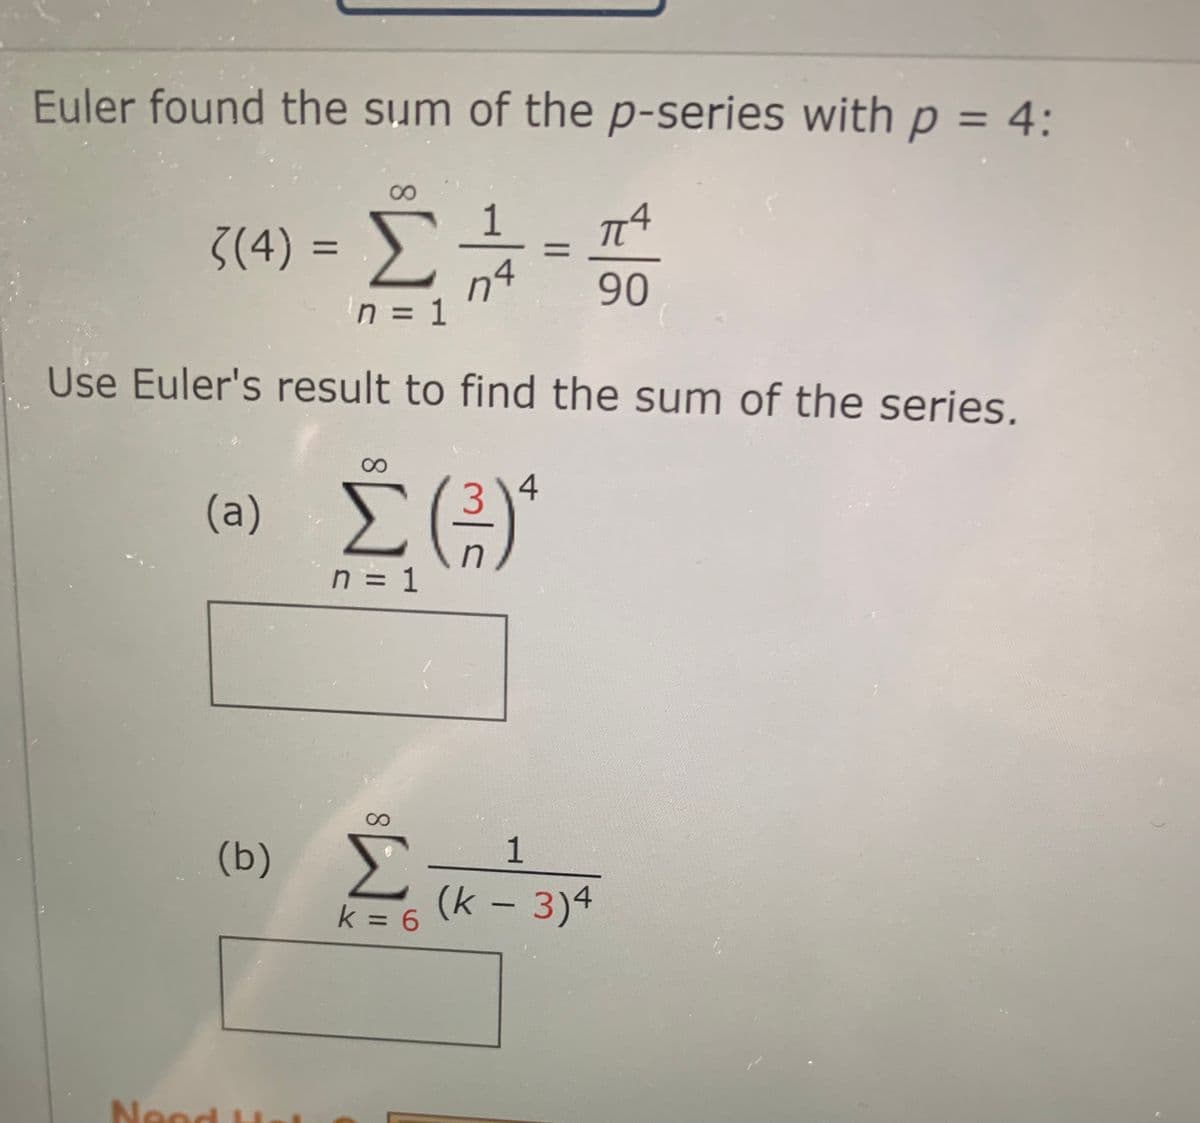 Euler found the sum of the p-series with p = 4:
ζ(4) = Σ
Σ
n = 1
Use Euler's result to find the sum of the series.
NOO
8
14
Ο
4
(2) Σ (3)
n = 1
(0) Σ
k = 6
1
(κ – 3)4
πT
90